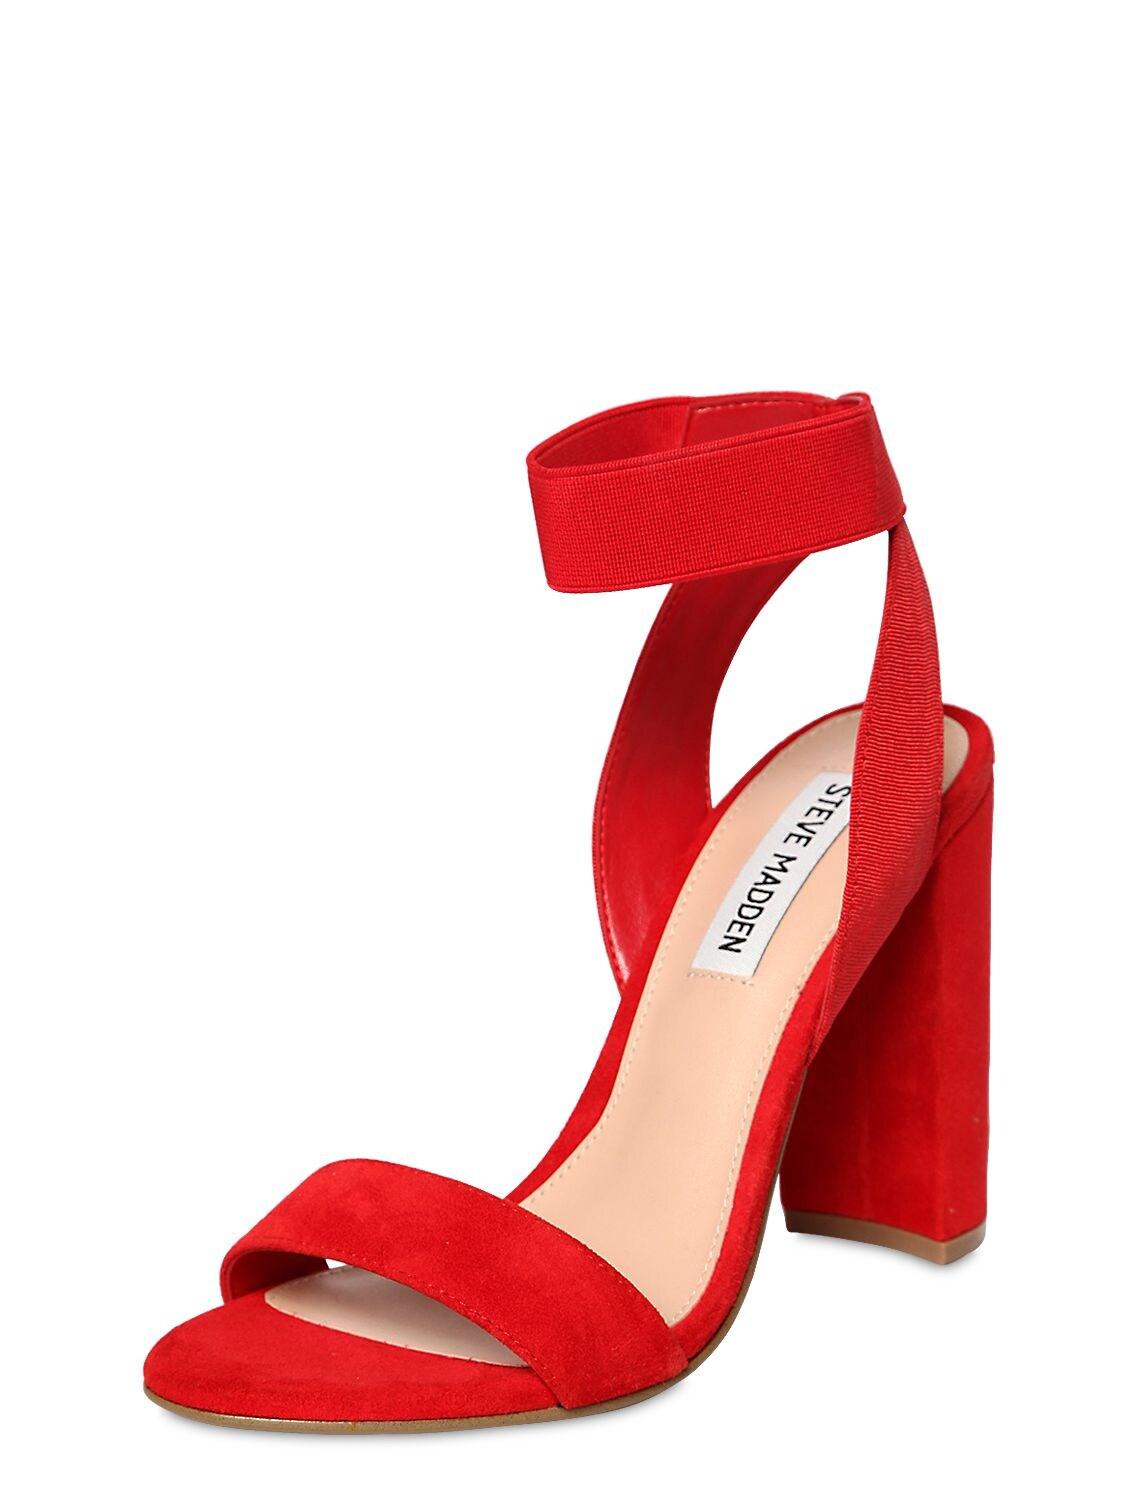 Steve Madden 100mm Celebrate Elastic & Suede Sandals in Red - Lyst